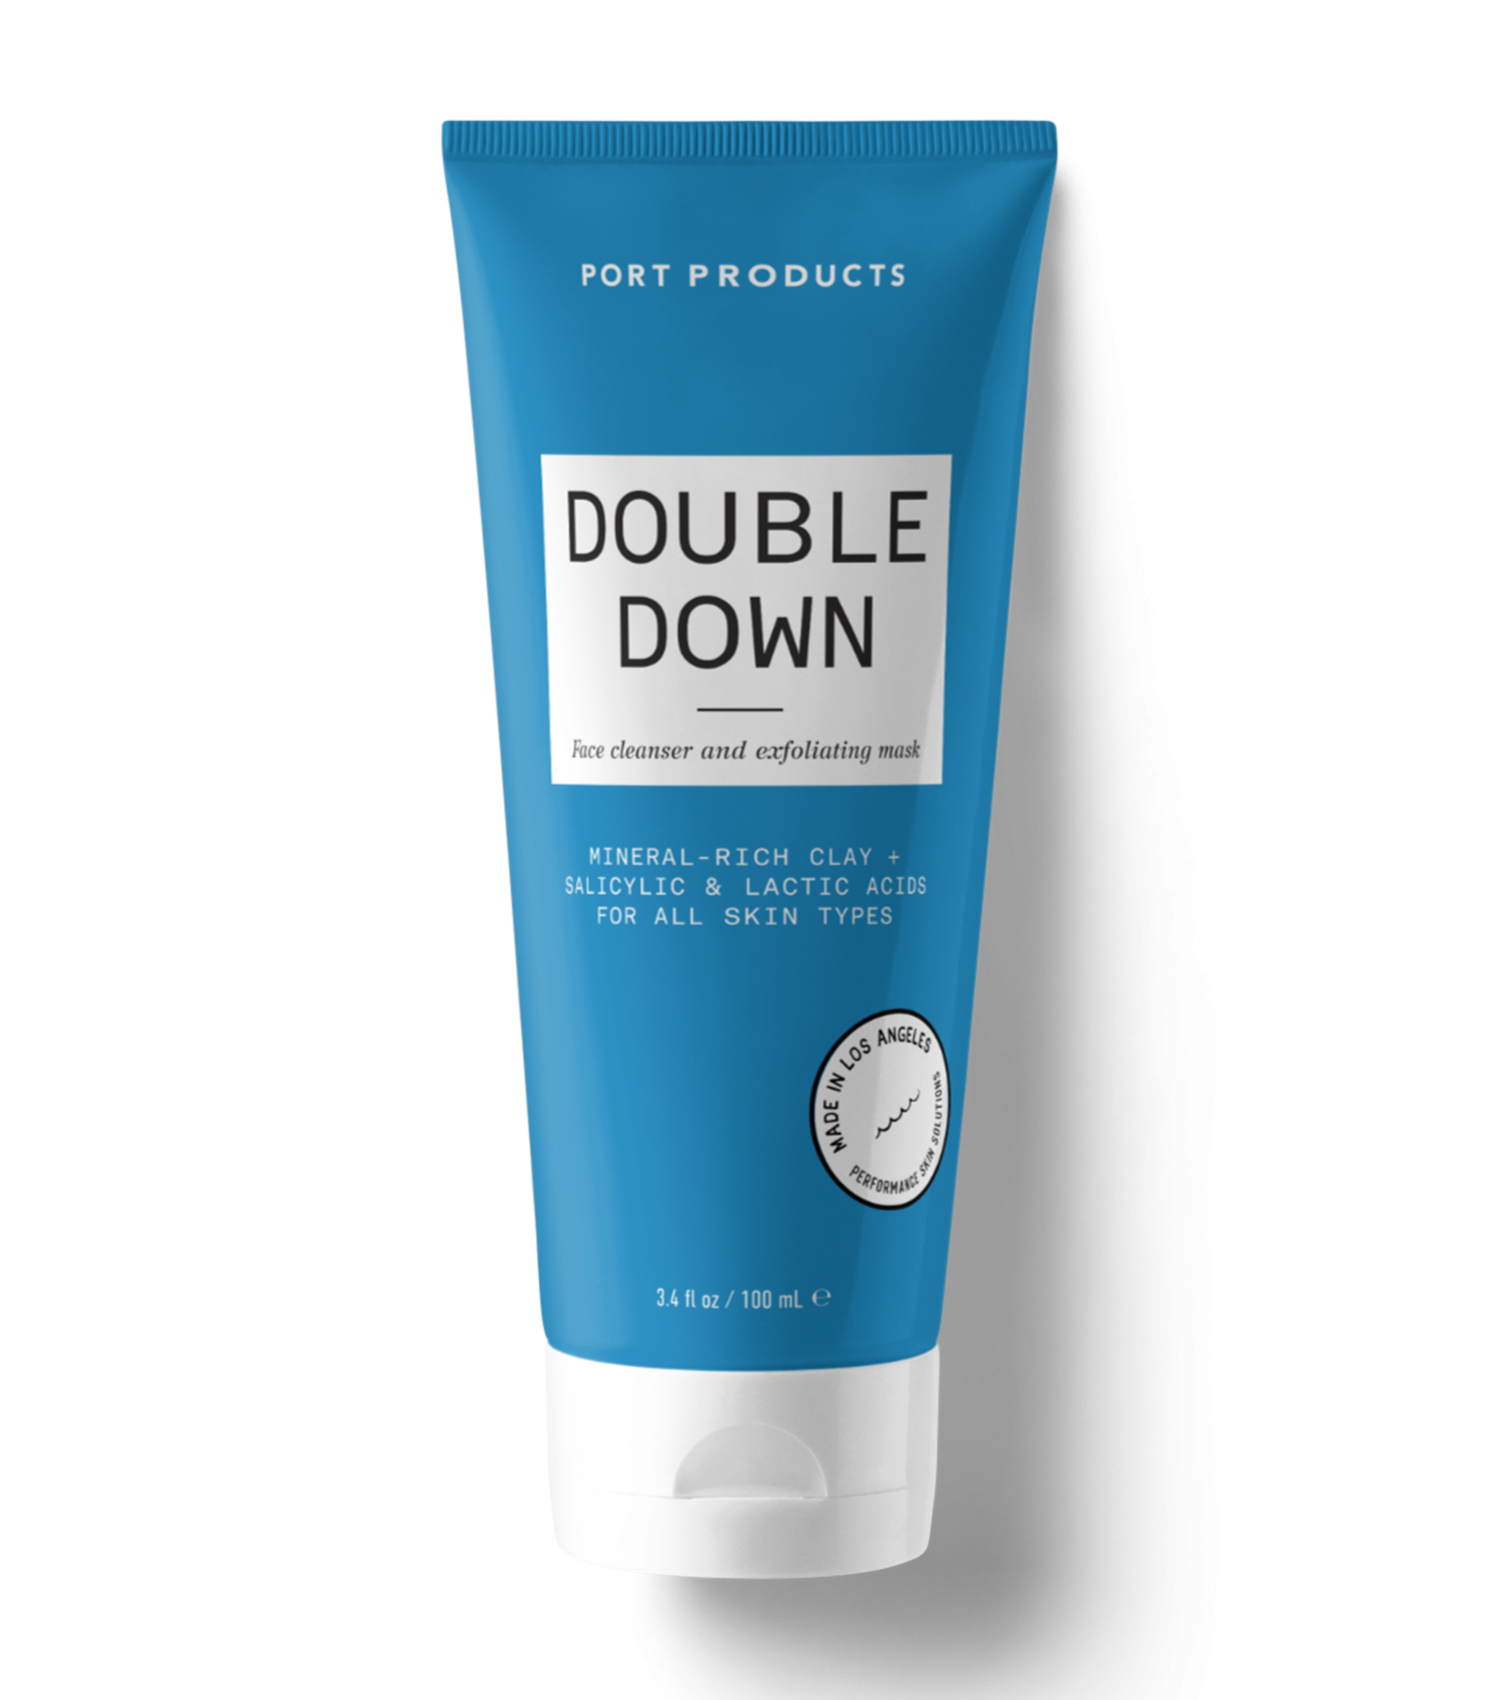 Port Products Double Down Facial Cleanser and Exfoliating Mask Port Products Double Down Facial Cleanser and Exfoliating Mask 1